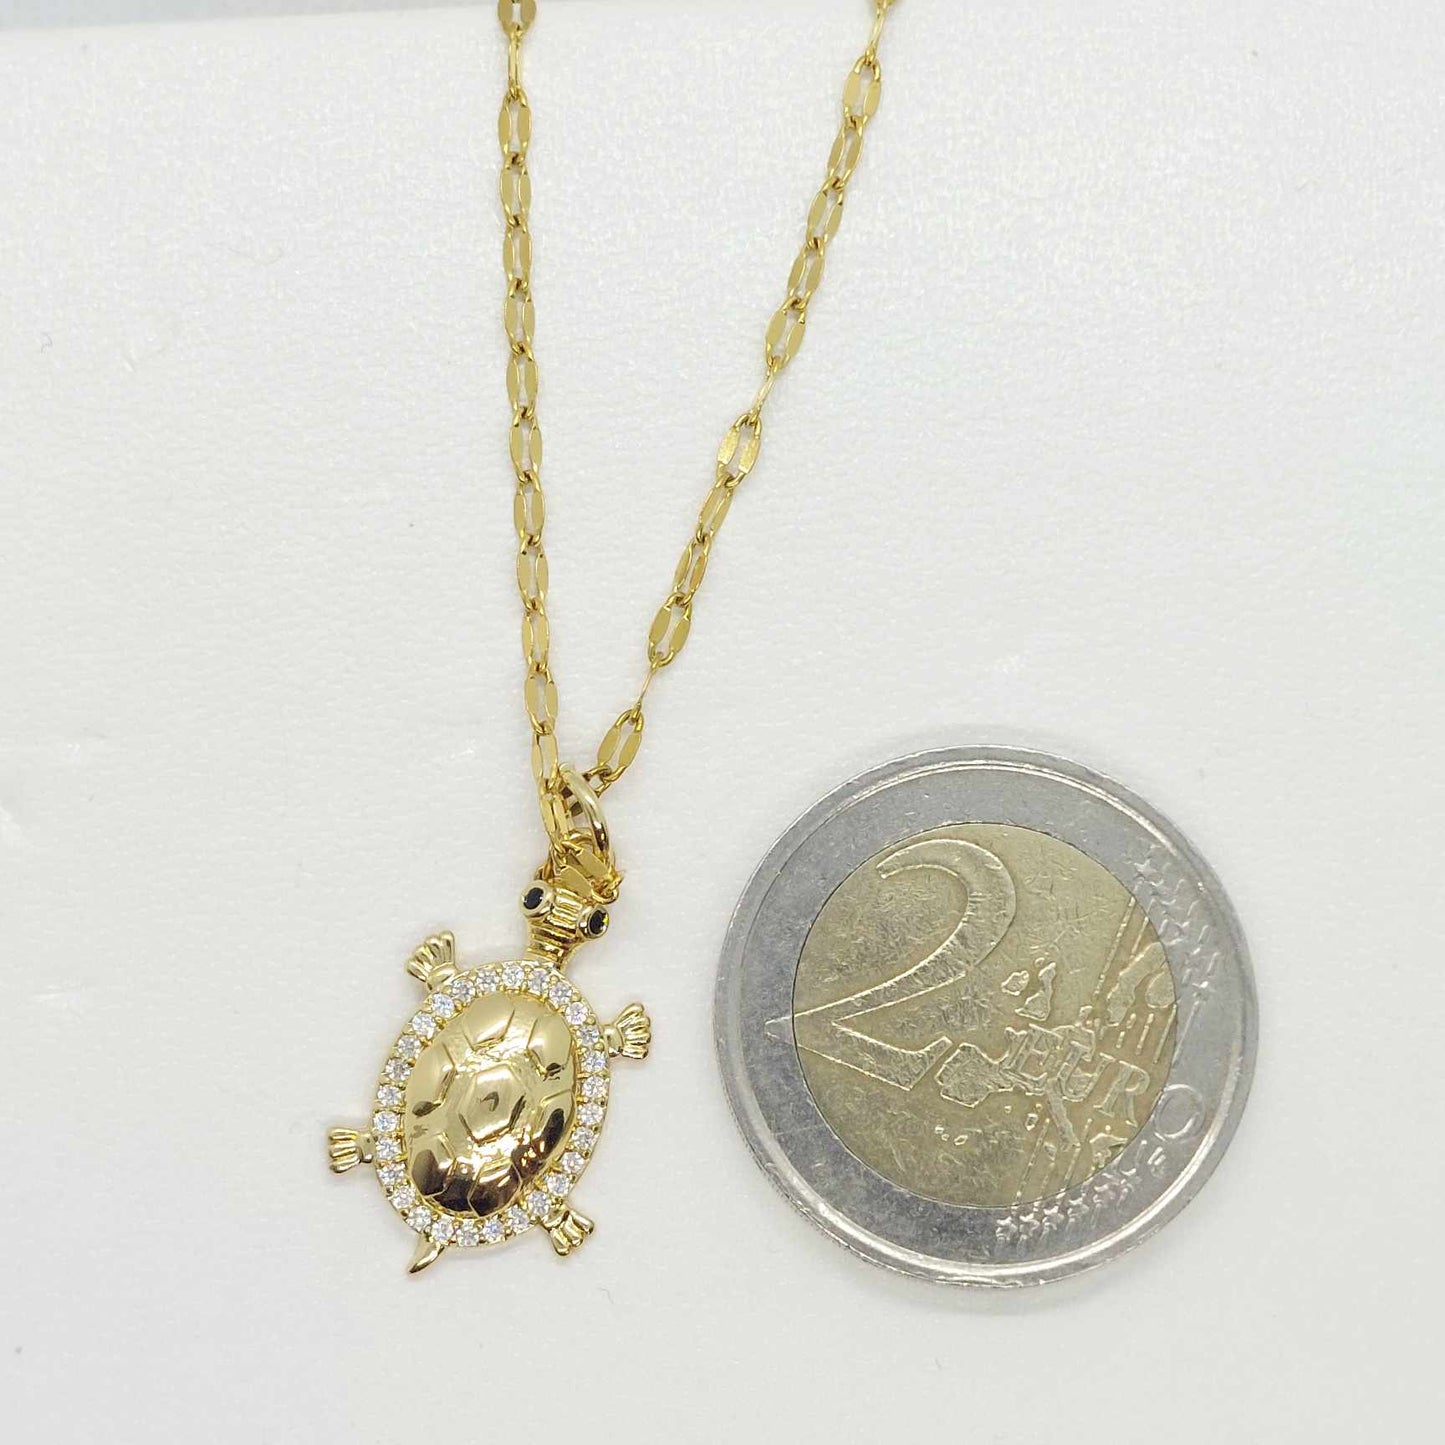 Turtle Pendant Necklace in Stainless Steel Gold Plated